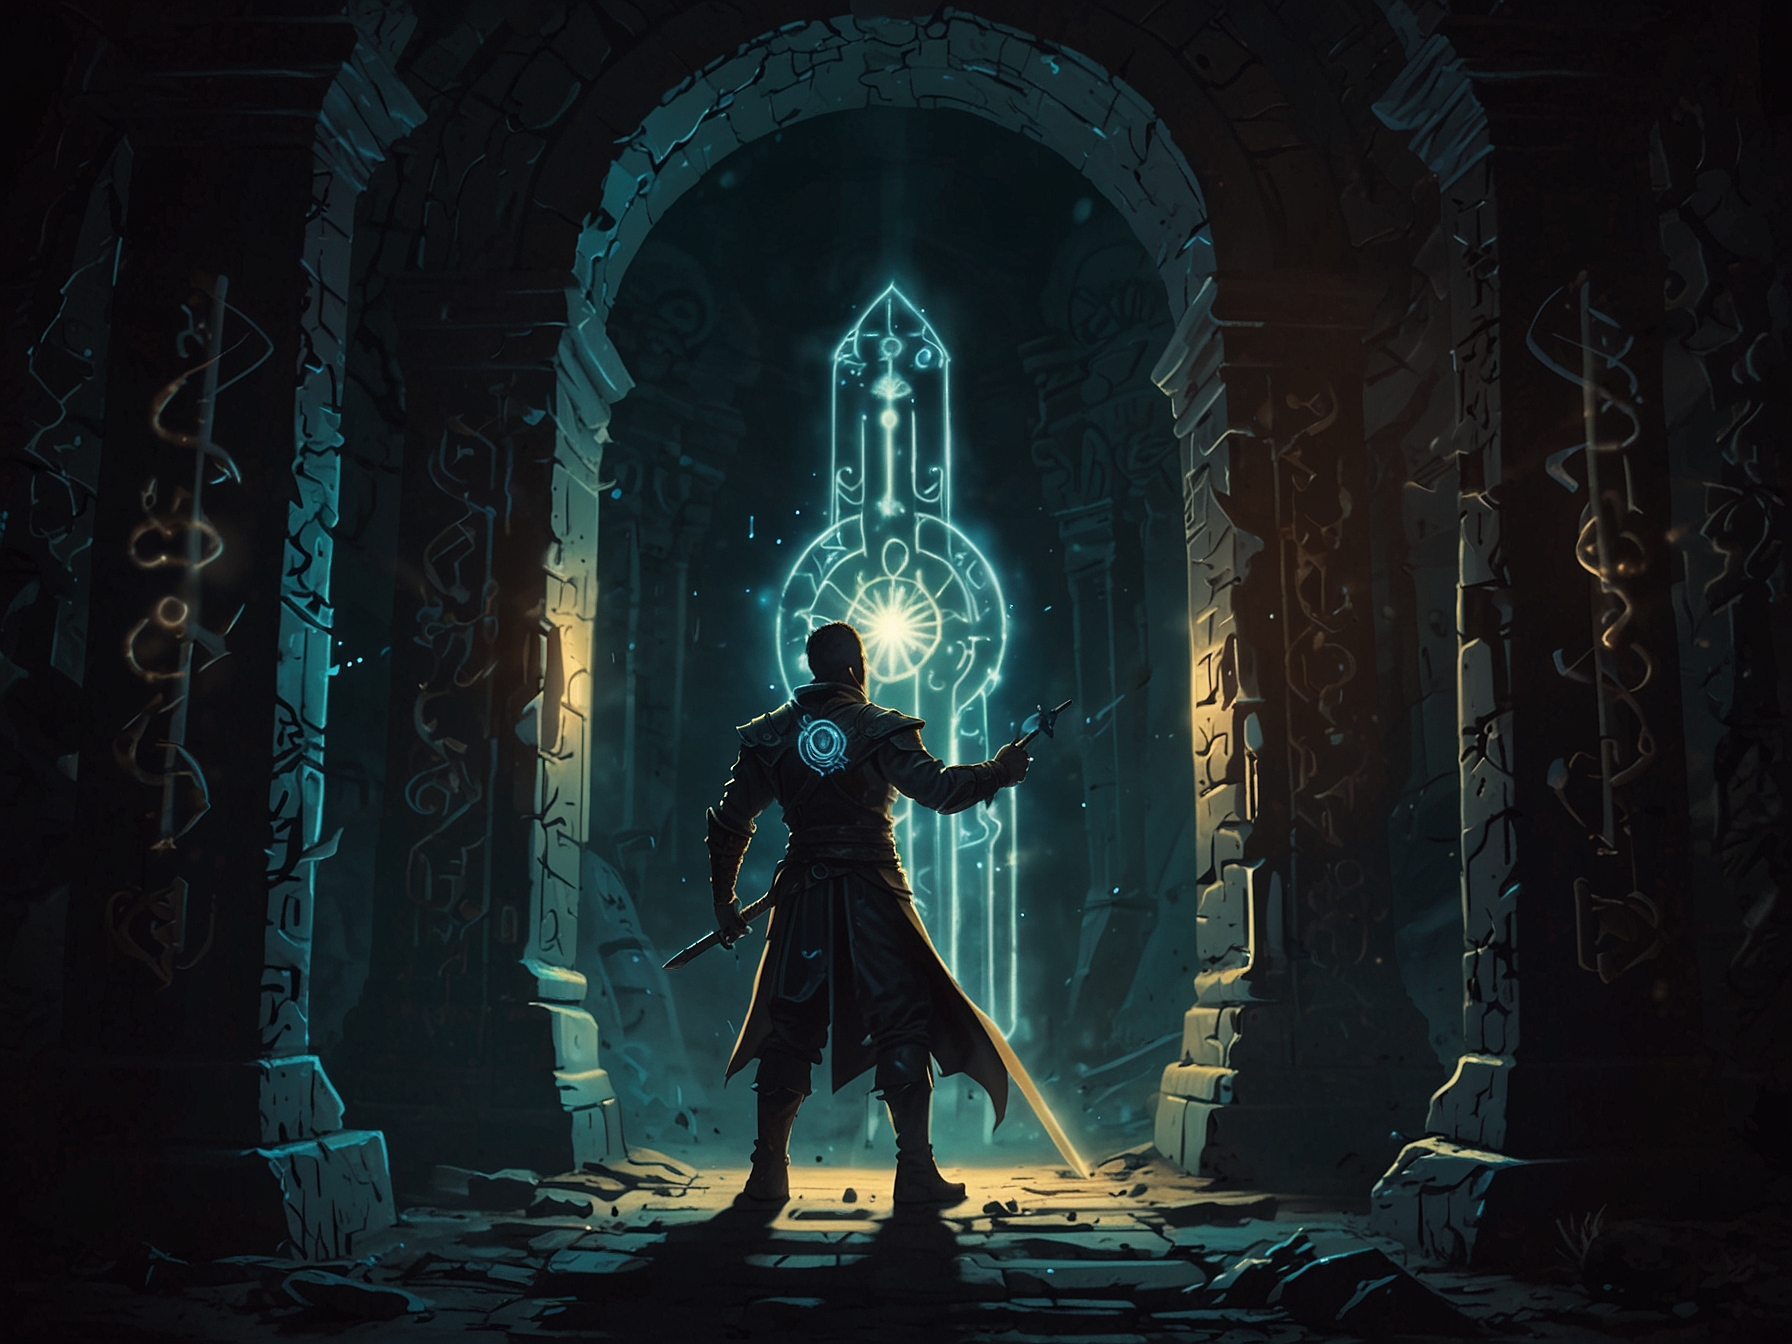 Illustration of a character activating a portal using the Imbued Sword Key, with glowing runes and a mystical gateway opening to an unknown enchanted realm.